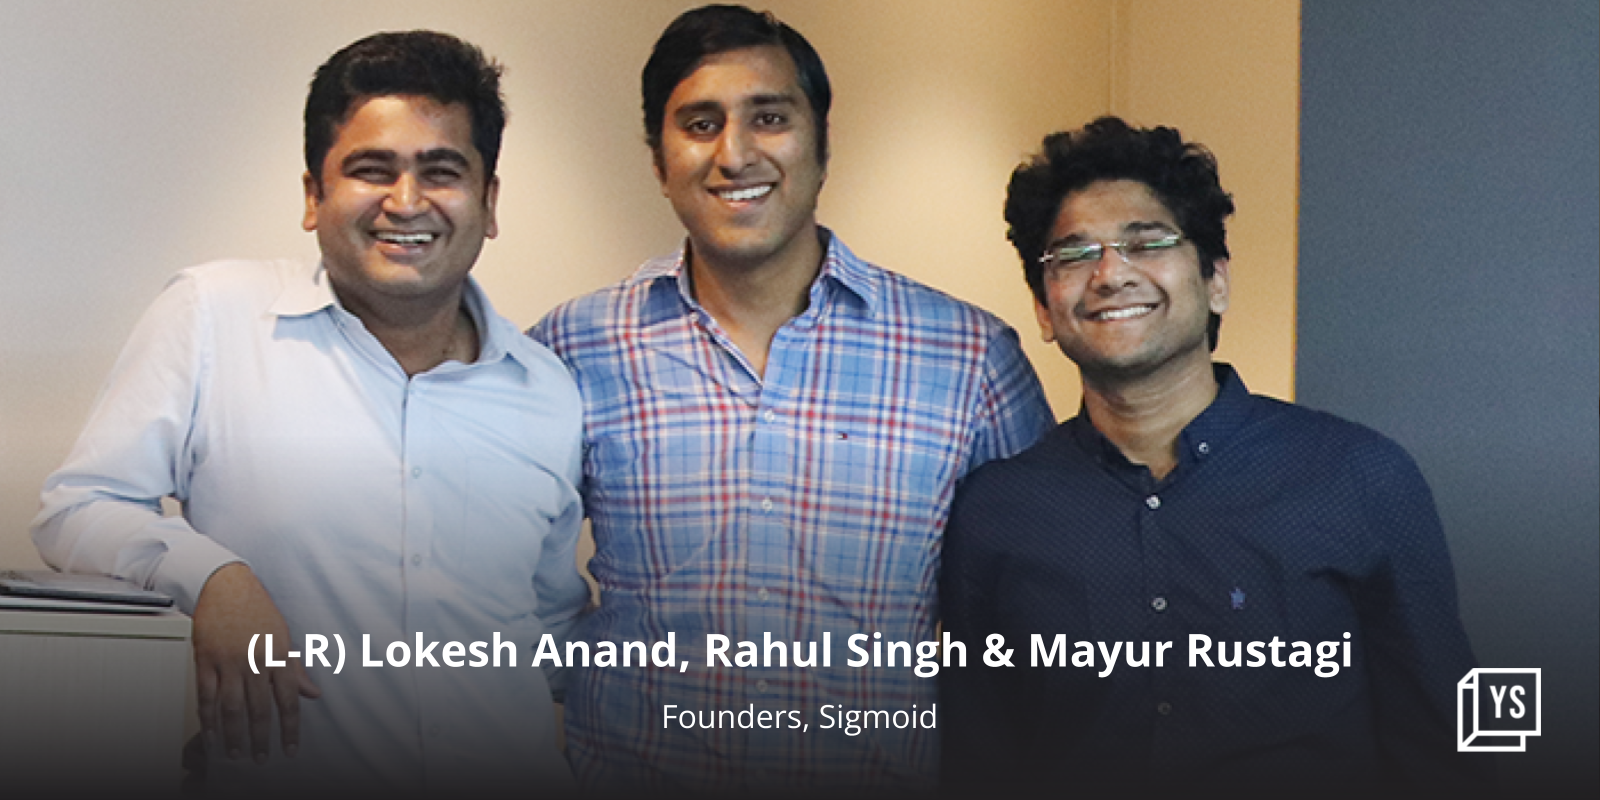 Tech startup Sigmoid raises $12M from Sequoia Capital India